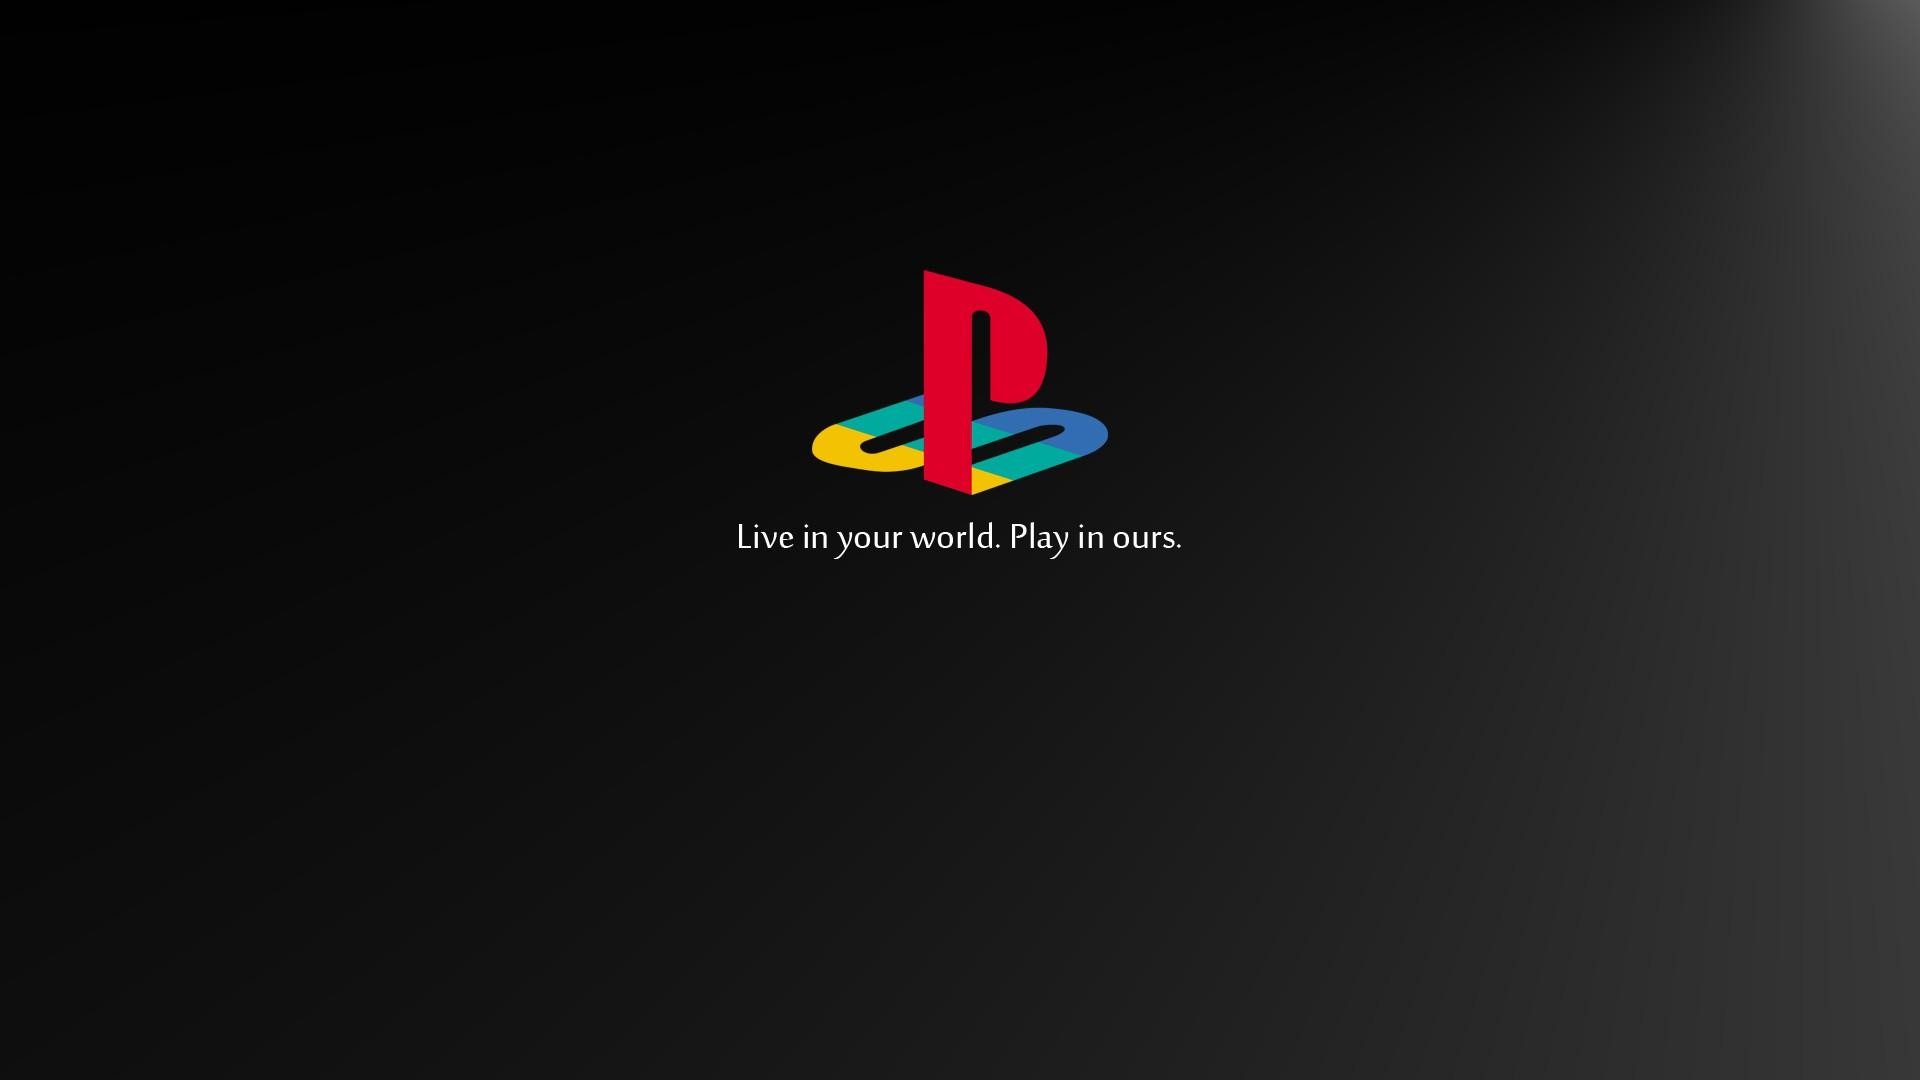 PS4 wallpaper image 1080p hd wallpaper download,background image, wallpaper and Online Stock